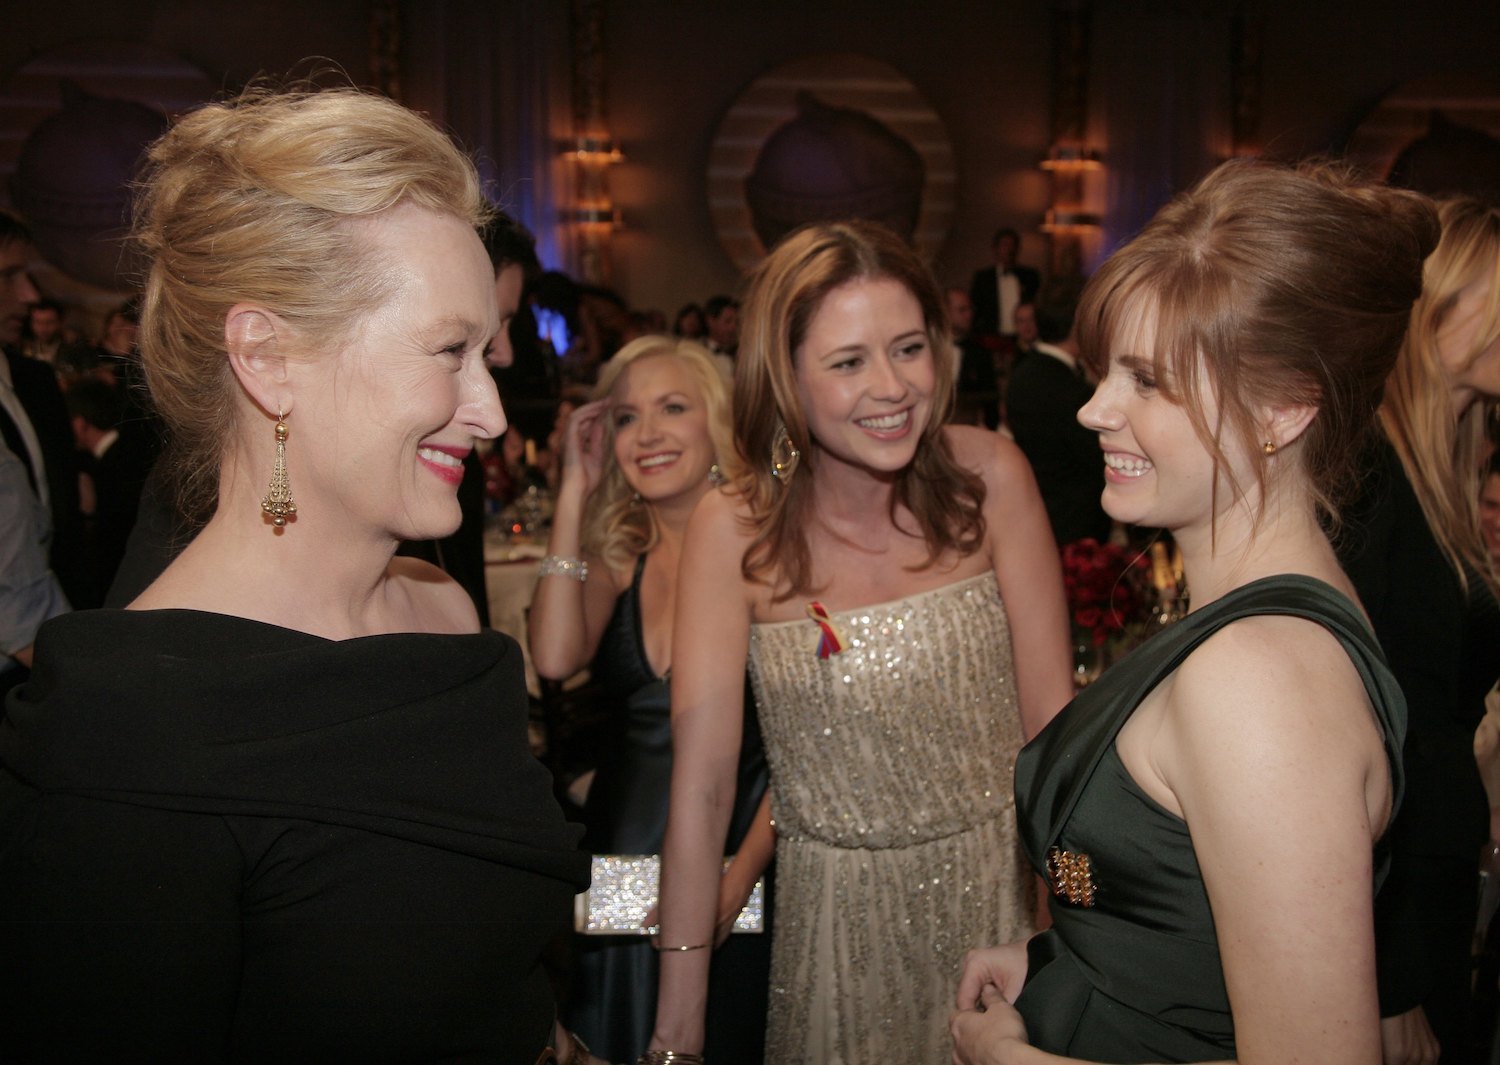 Meryl Streep talks to Amy Adams as Jenna Fischer approaches, laughing, at the Golden Globes in 2010